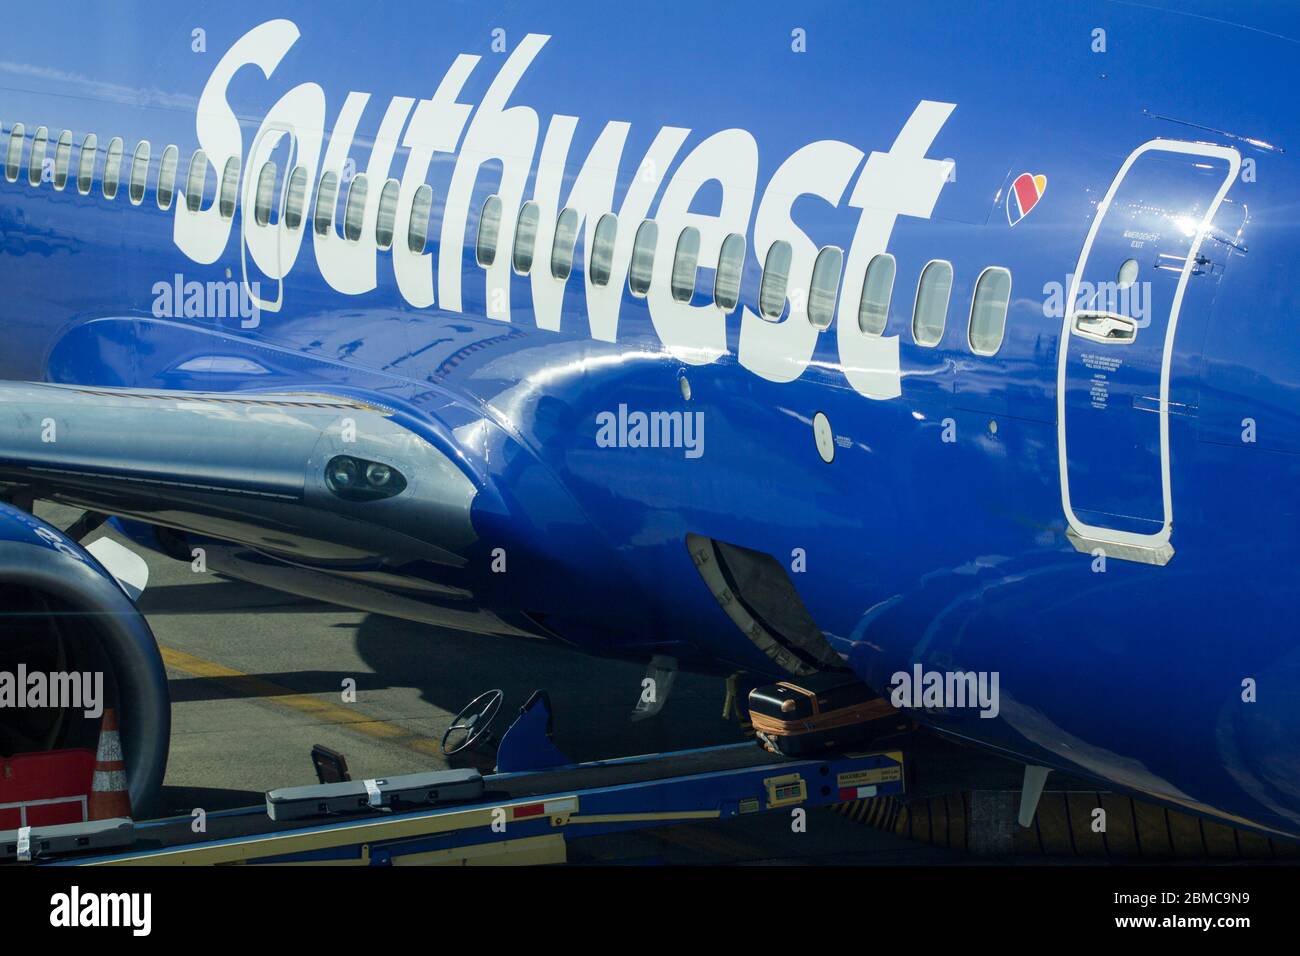 The Southwest logo is seen on a Southwest Airlines passenger aircraft in Portland International Airport on Feb 16, 2020. Stock Photo